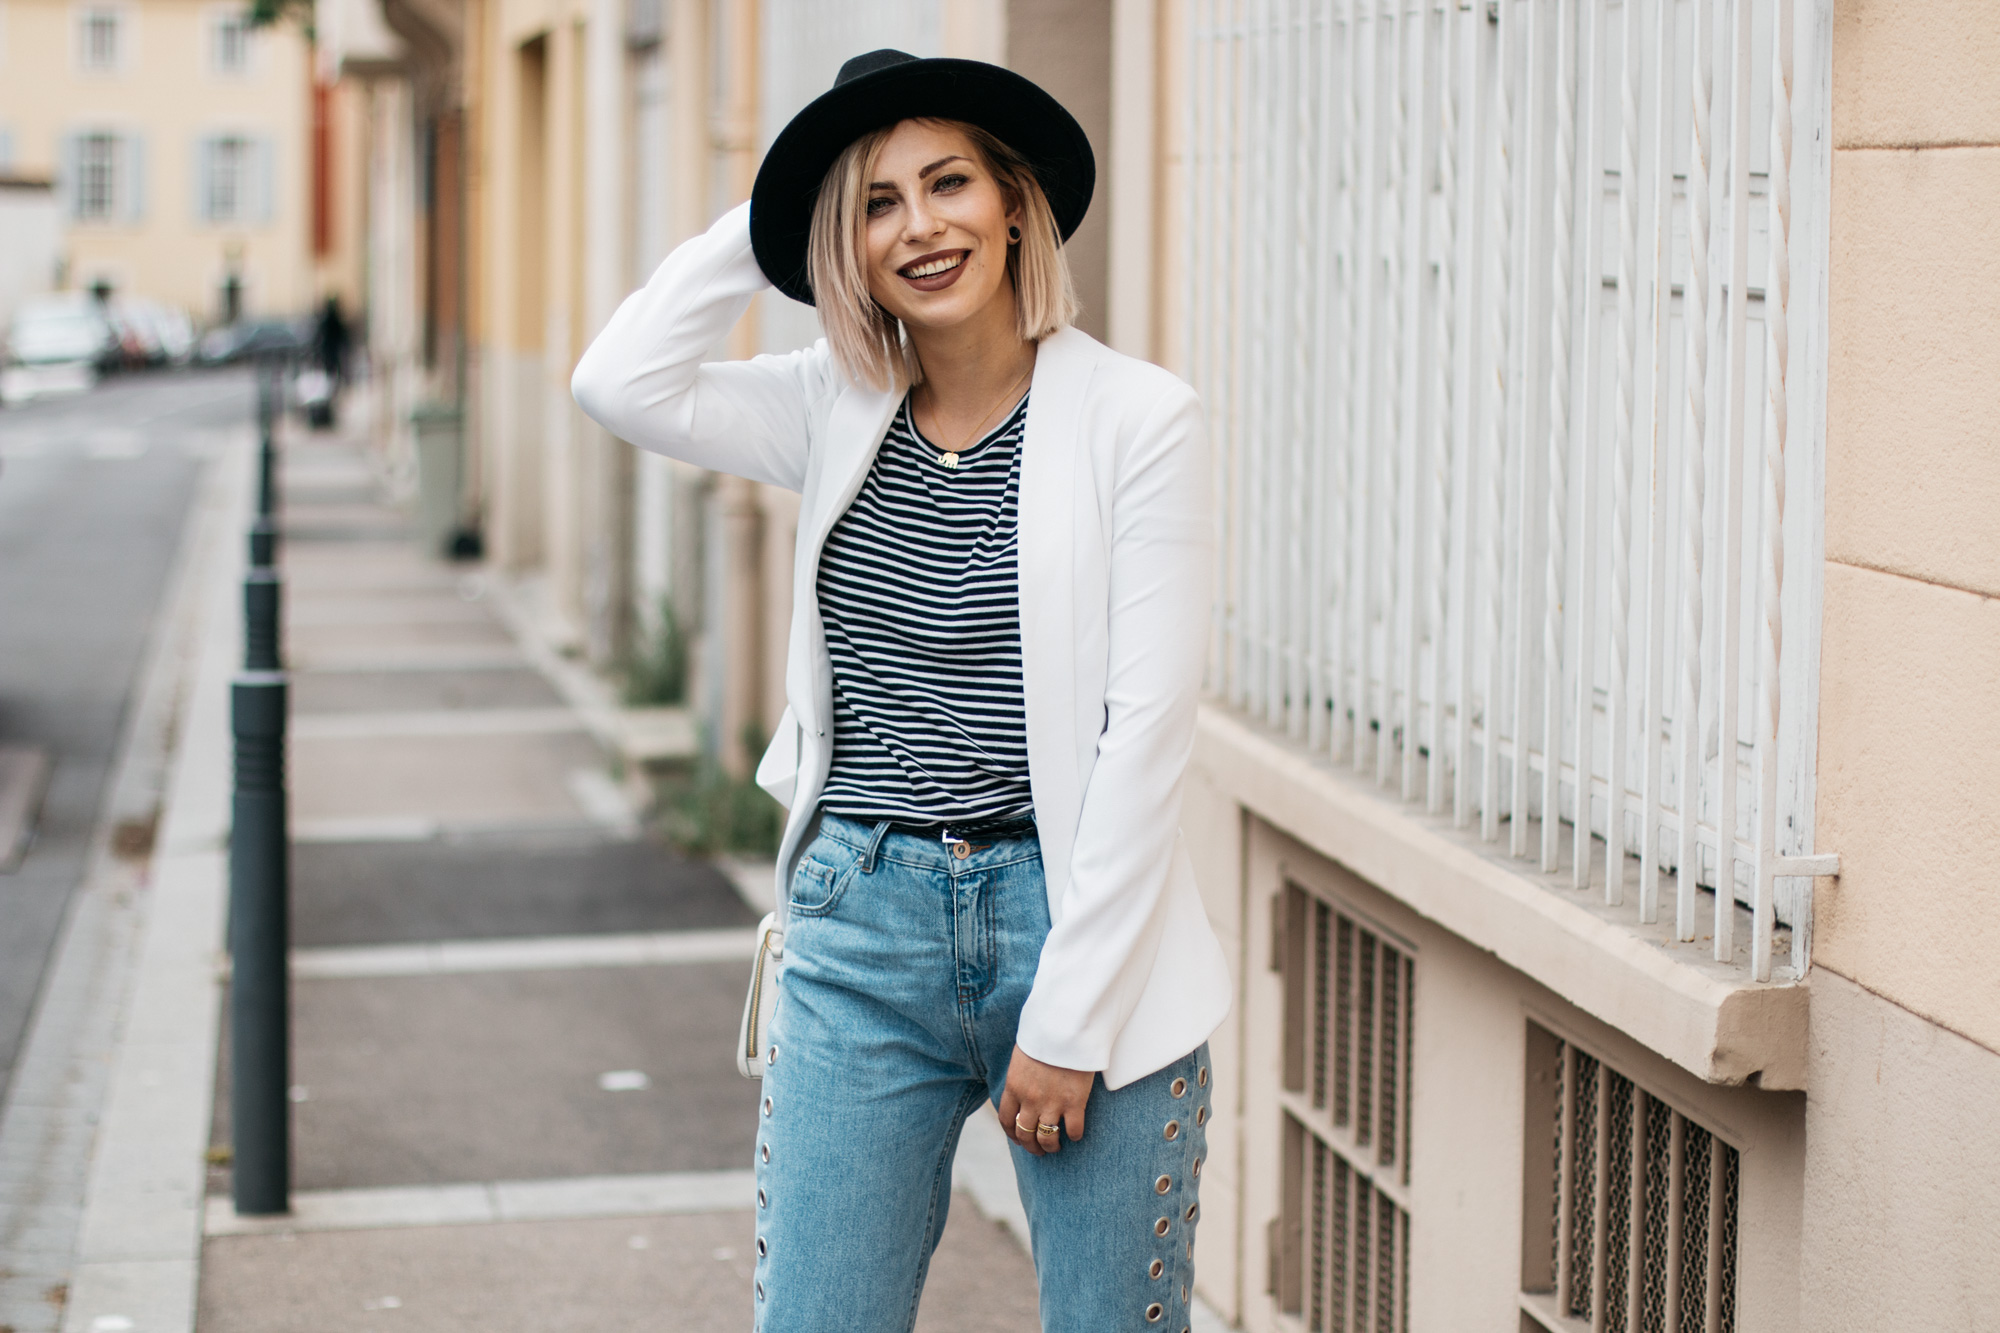 How to wear: Mom Jeans | labels: pull&bear (jeans), Kala Berlin (white blazer), sandals (vic matie) | style: basic, effortless, chic | fashion | location: perpignan